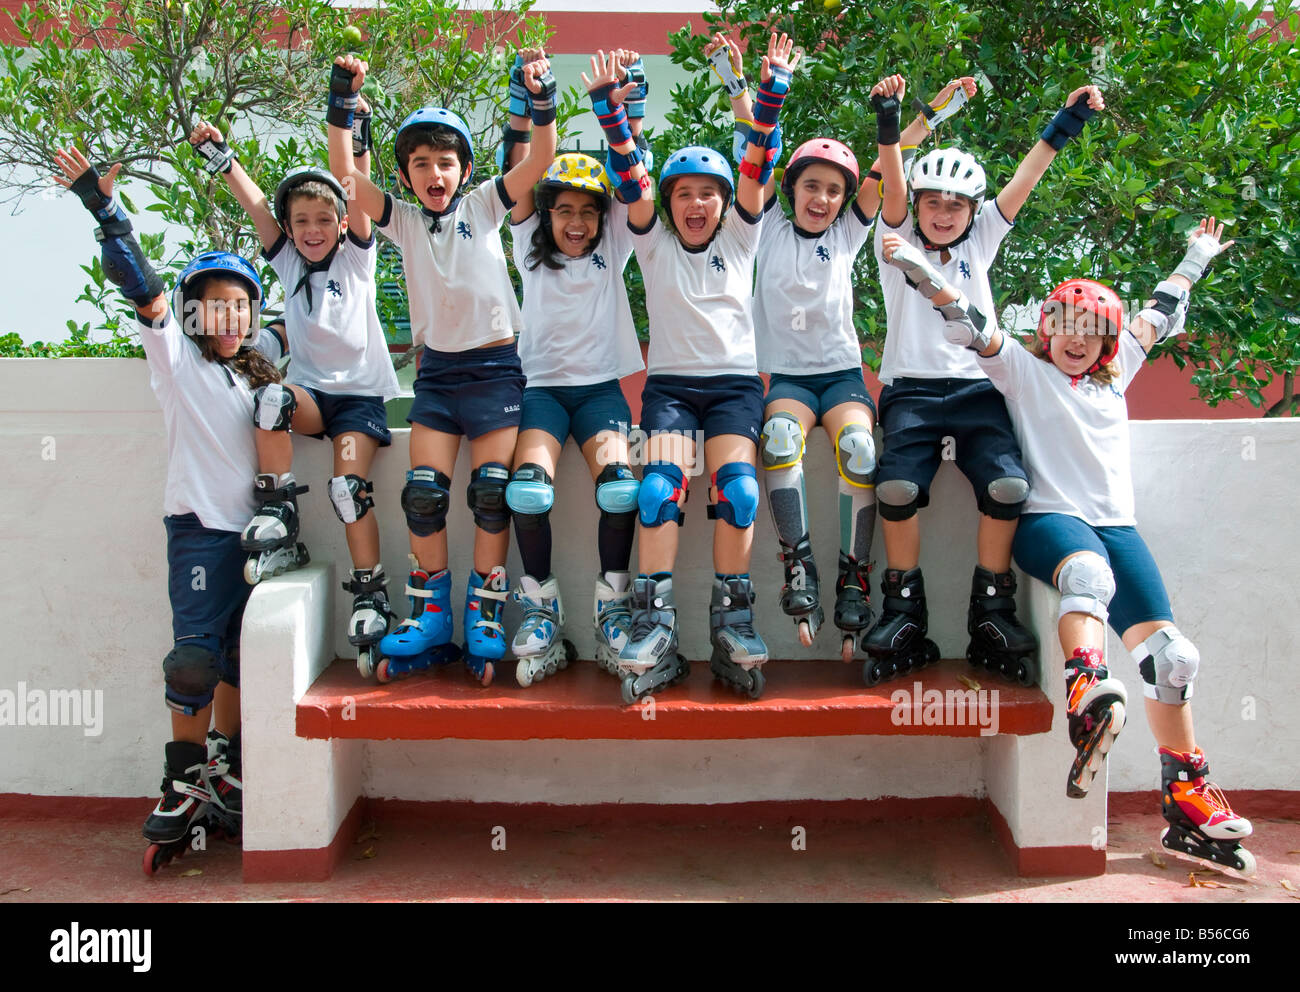 School Photo roller blade team group of happy junior school children wearing safety helmets and knee pads wave together in school playground Stock Photo